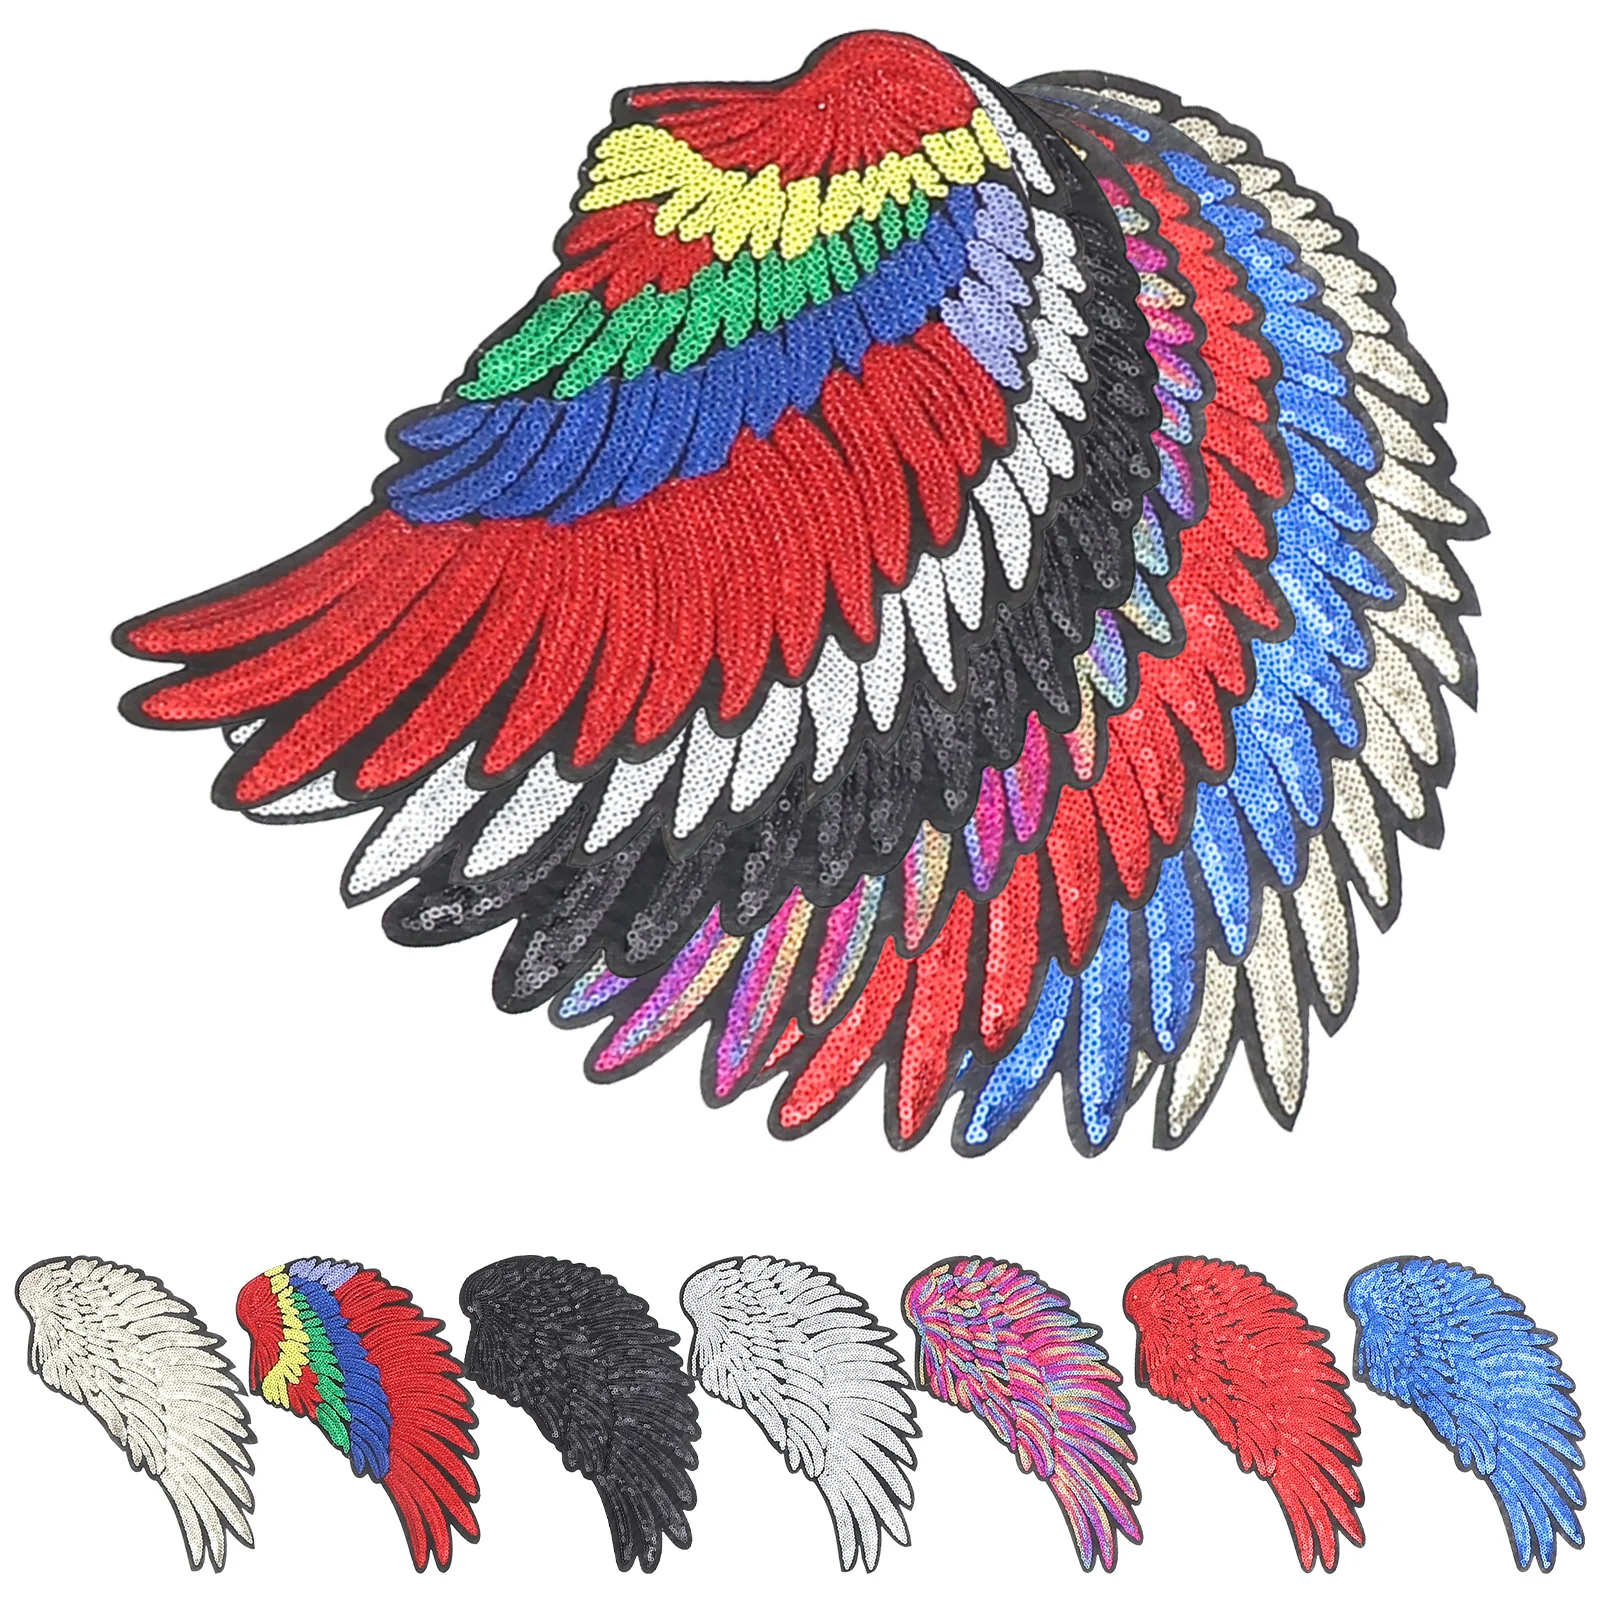 

7 Pairs Applique Decor Sequin Badge Accessories Wing Design Clothes Repairing Patch Embroidery Patches Sequins Garment